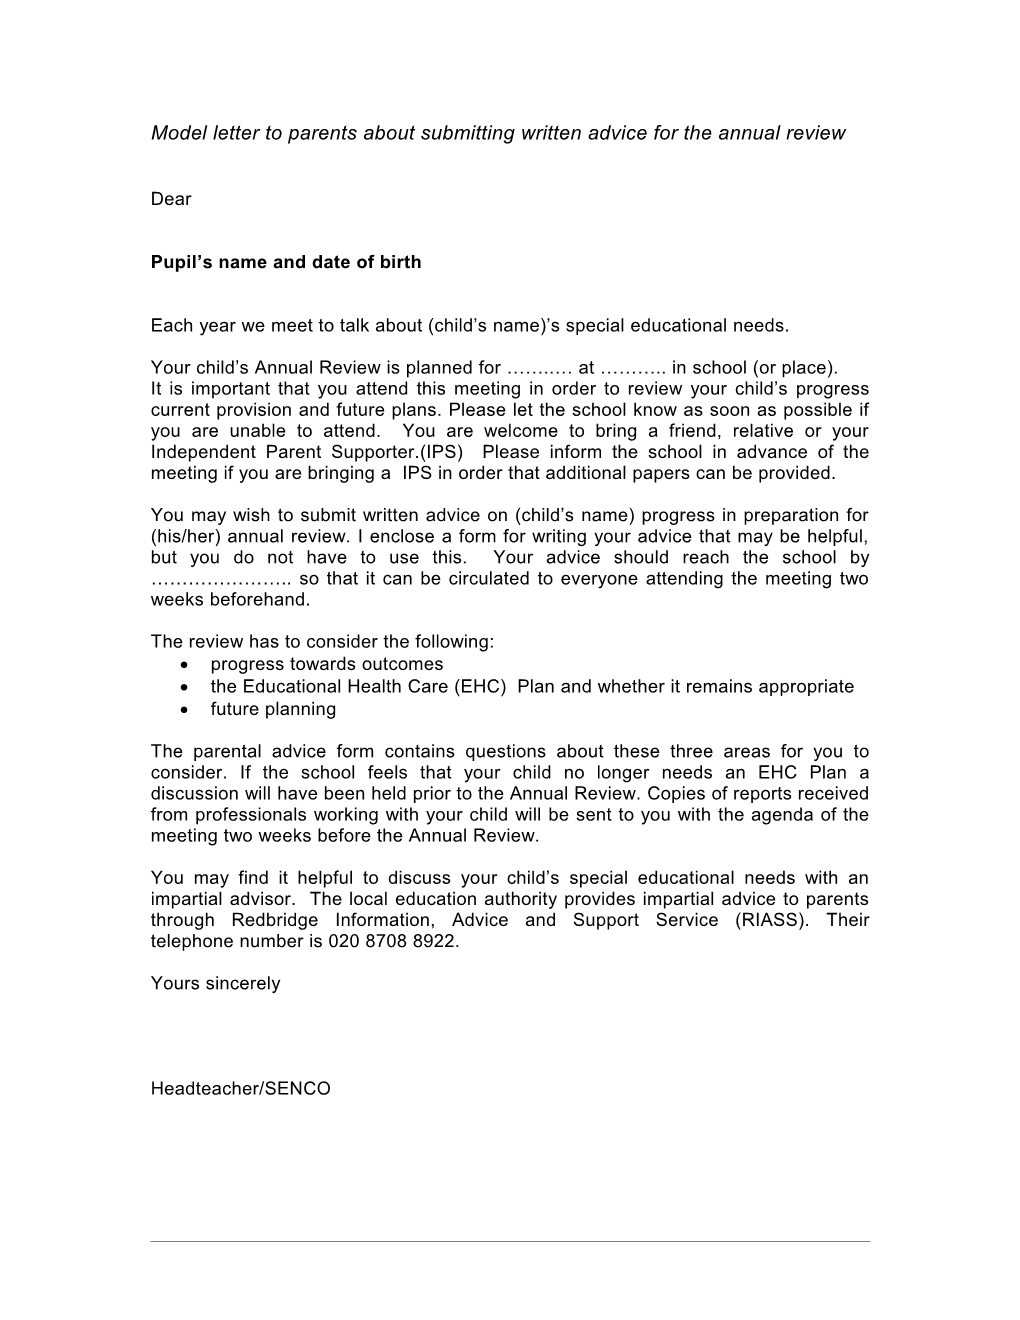 Model Letter to Professionals About Submitting Written Advice for the Annual Review